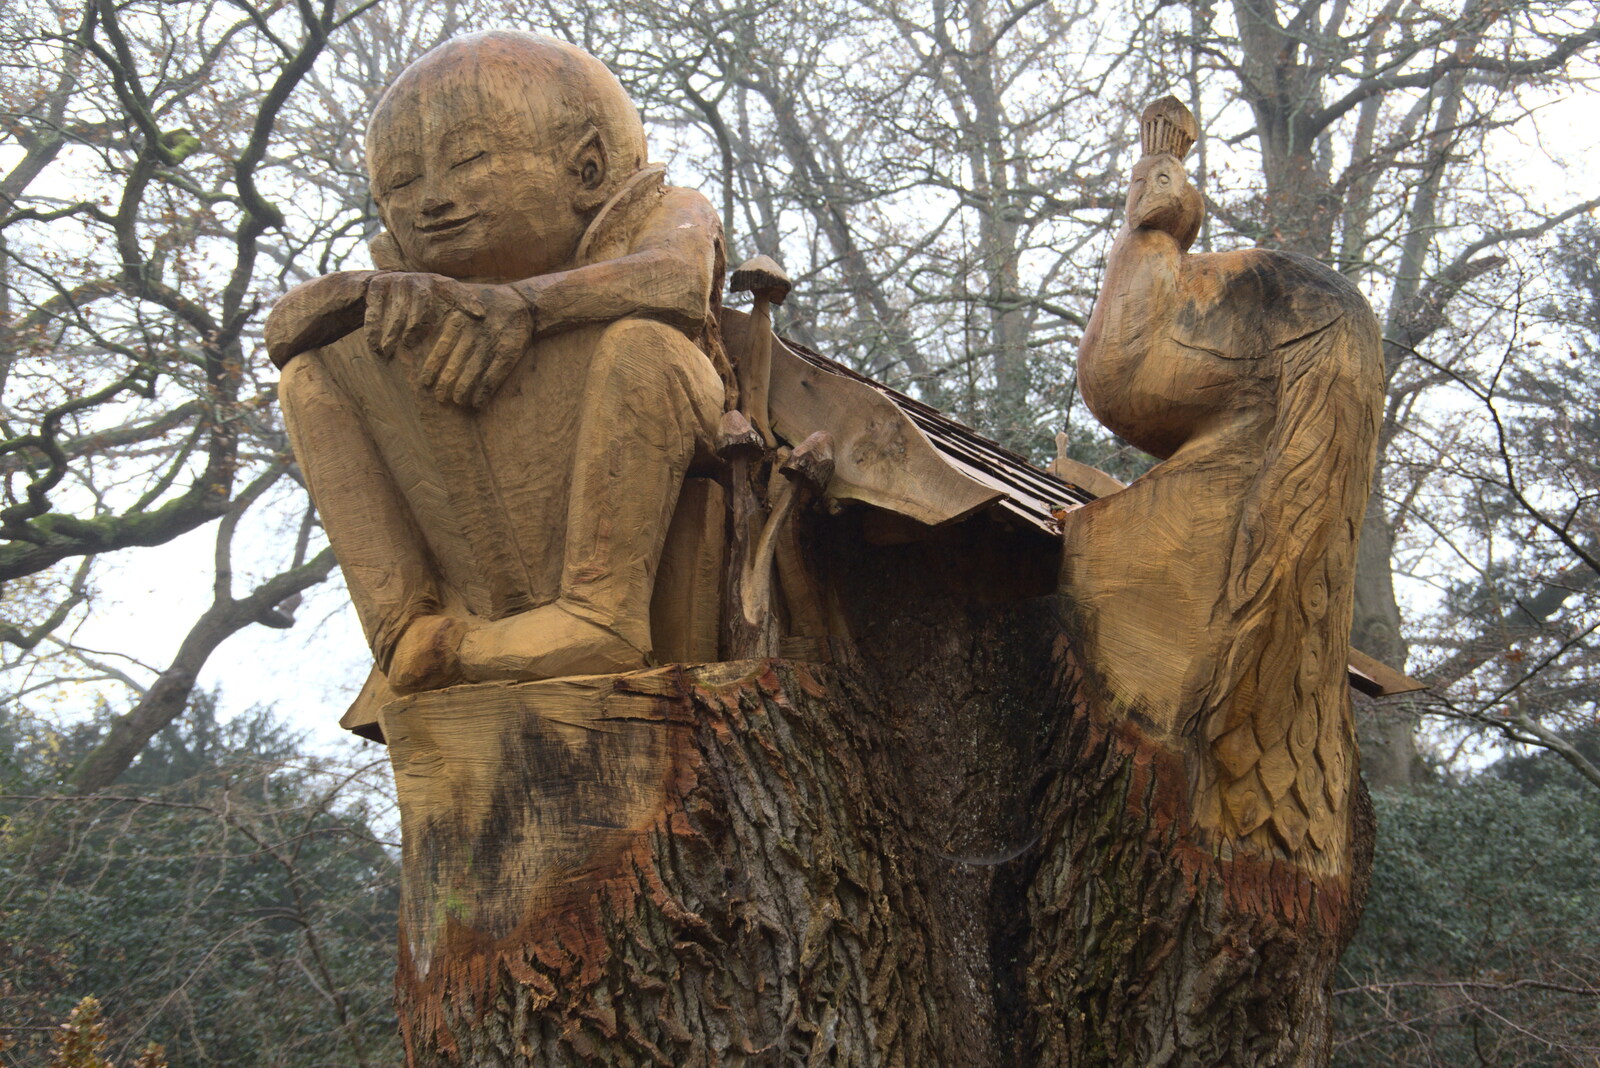 There's a new sculpture in a tree stump from A Return to Thornham Walks, Thornham, Suffolk - 19th December 2021